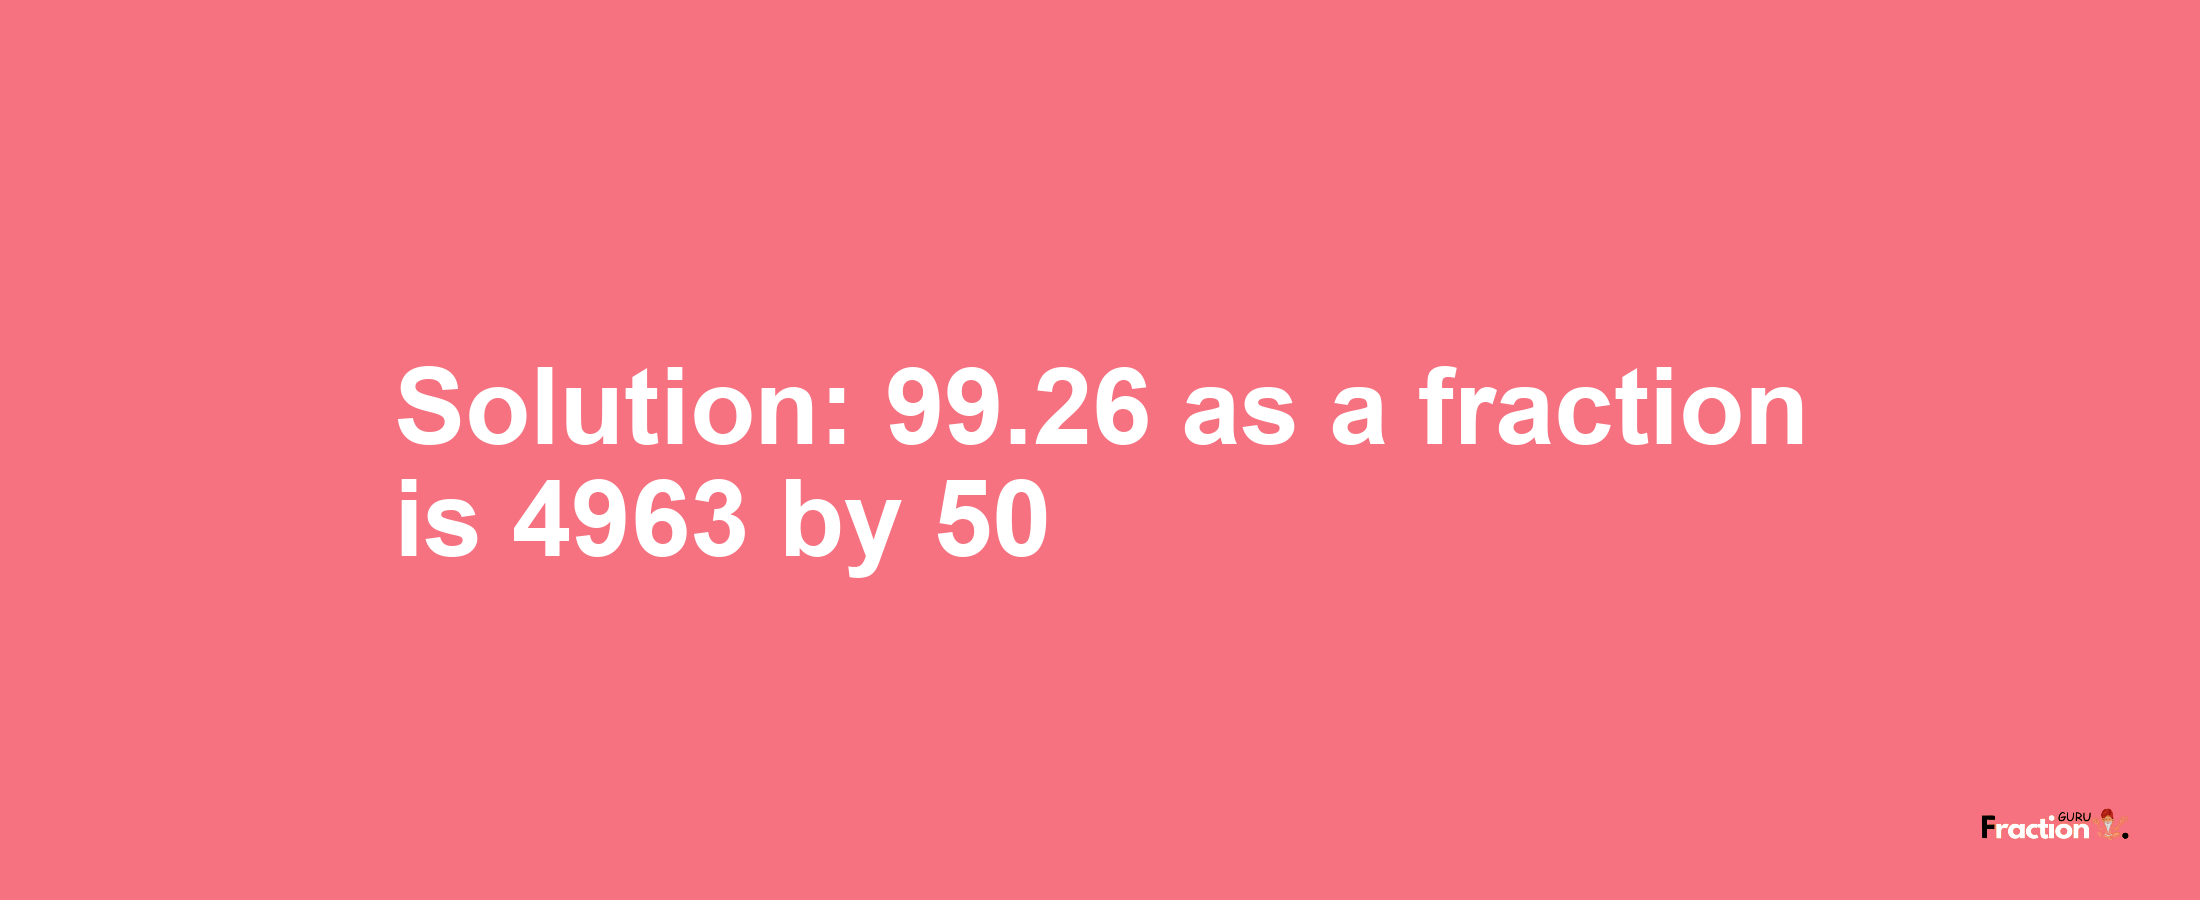 Solution:99.26 as a fraction is 4963/50